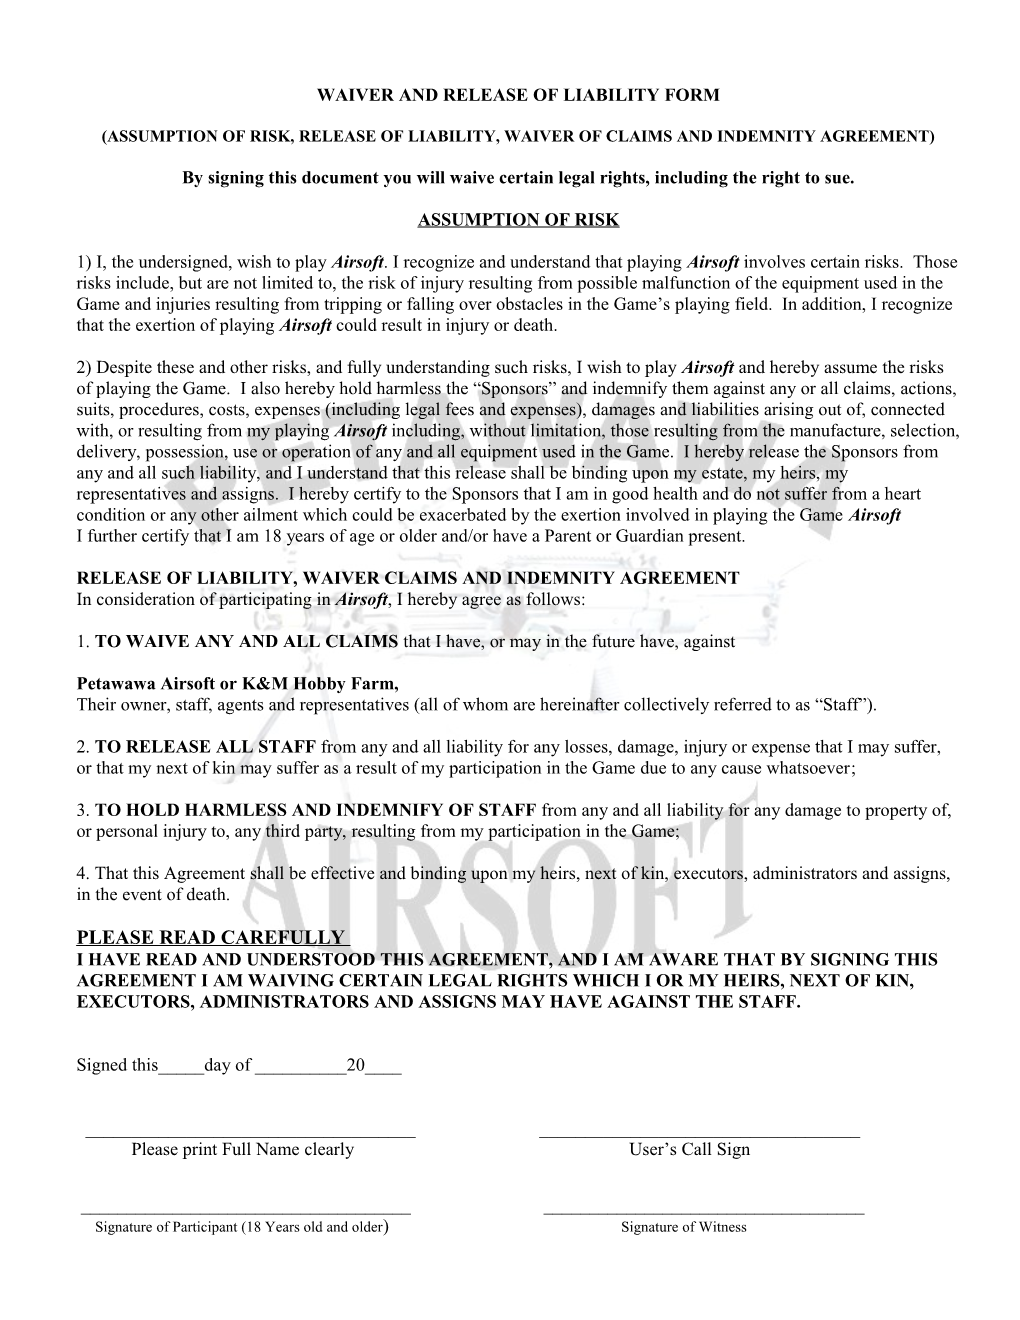 Waiver and Release of Liability Form s1